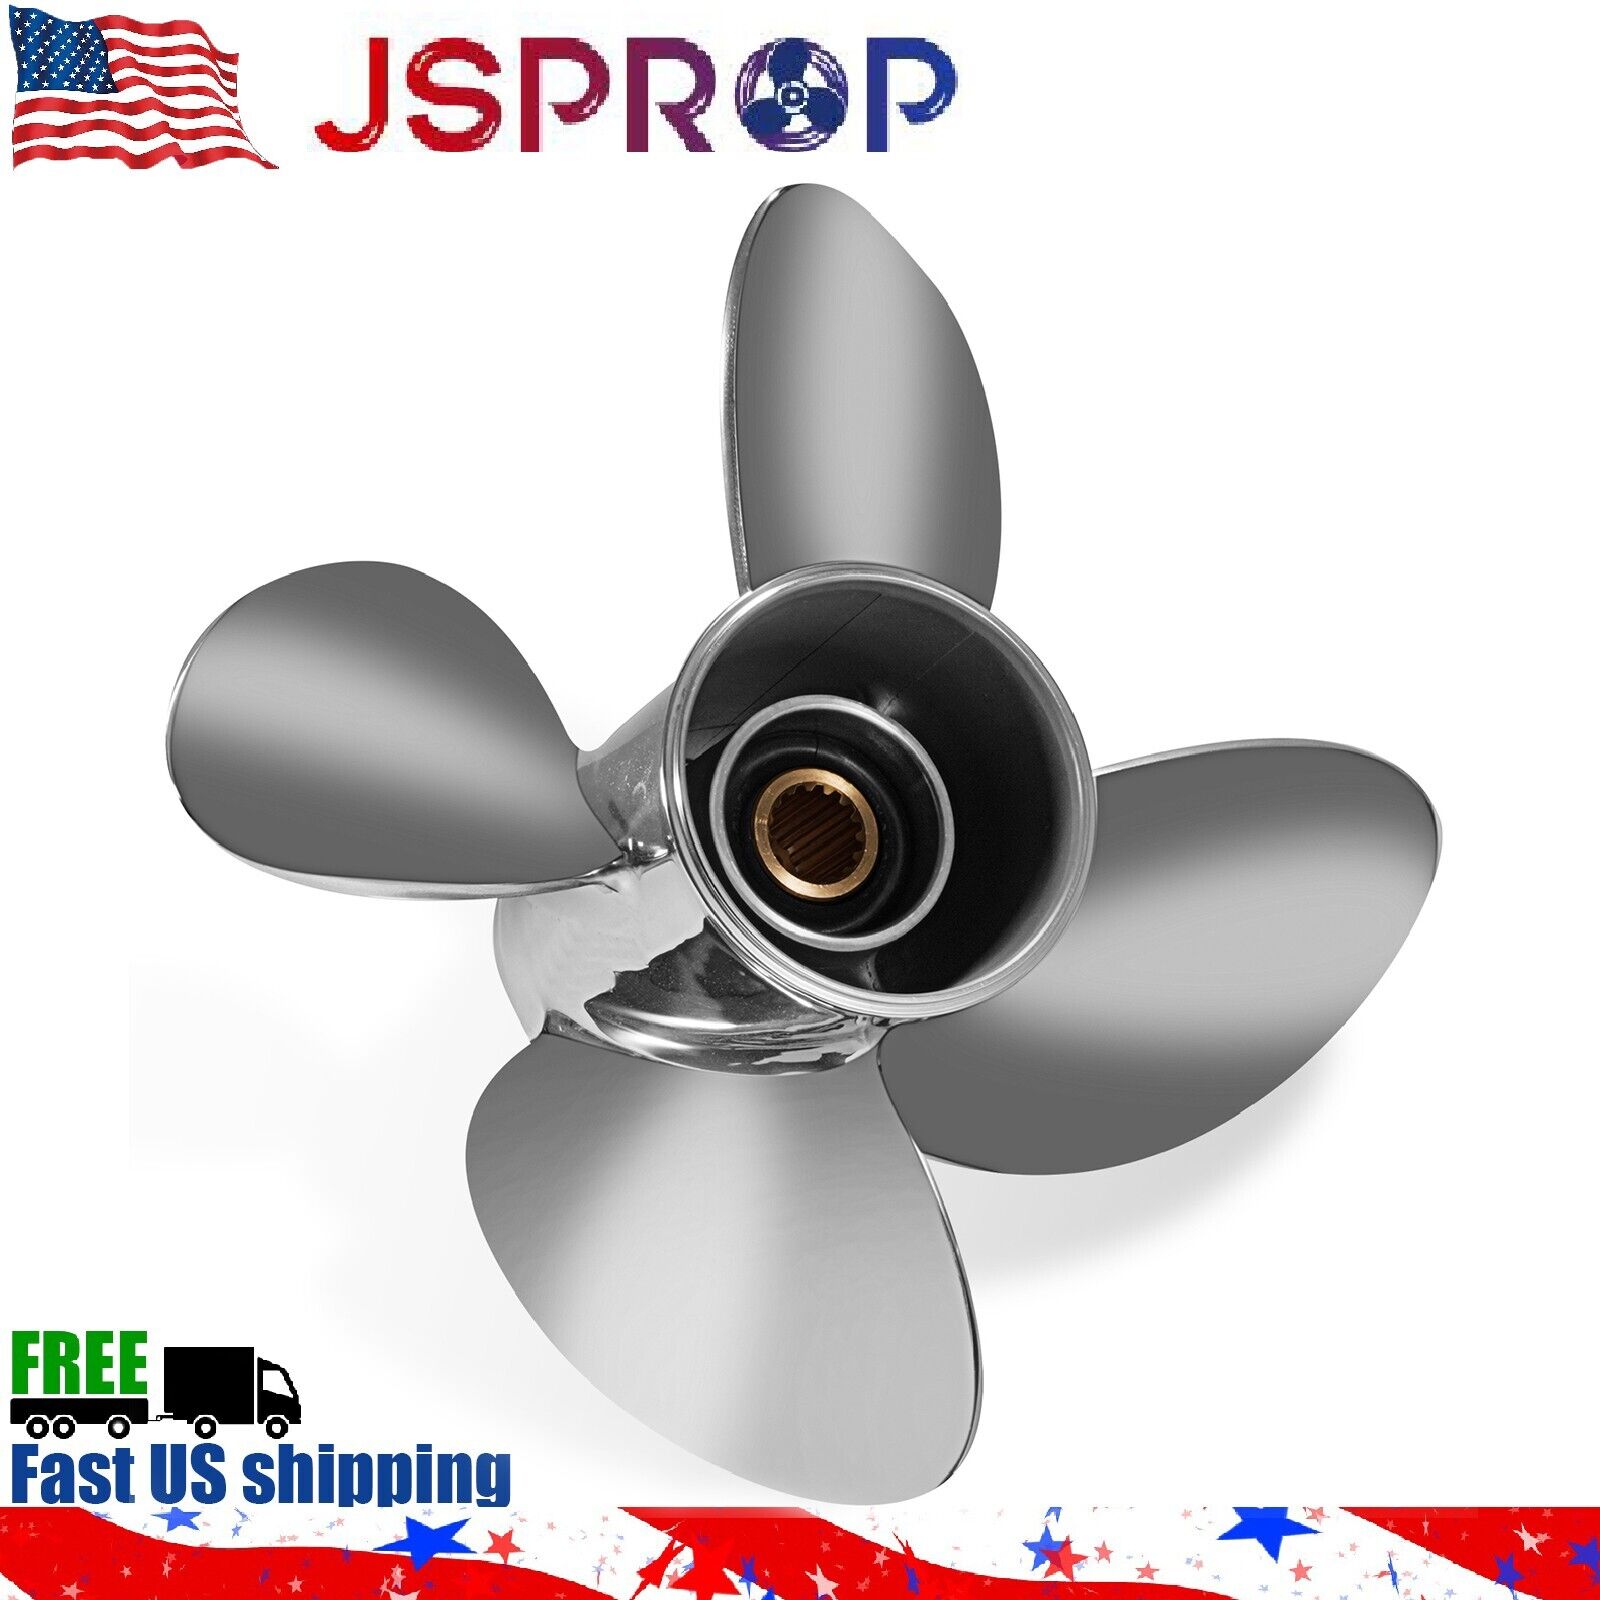 JSPROP OEM 15 1/4×20 Stainless Boat Propeller Fit Yamaha 150-250HP 15 Tooth,RH